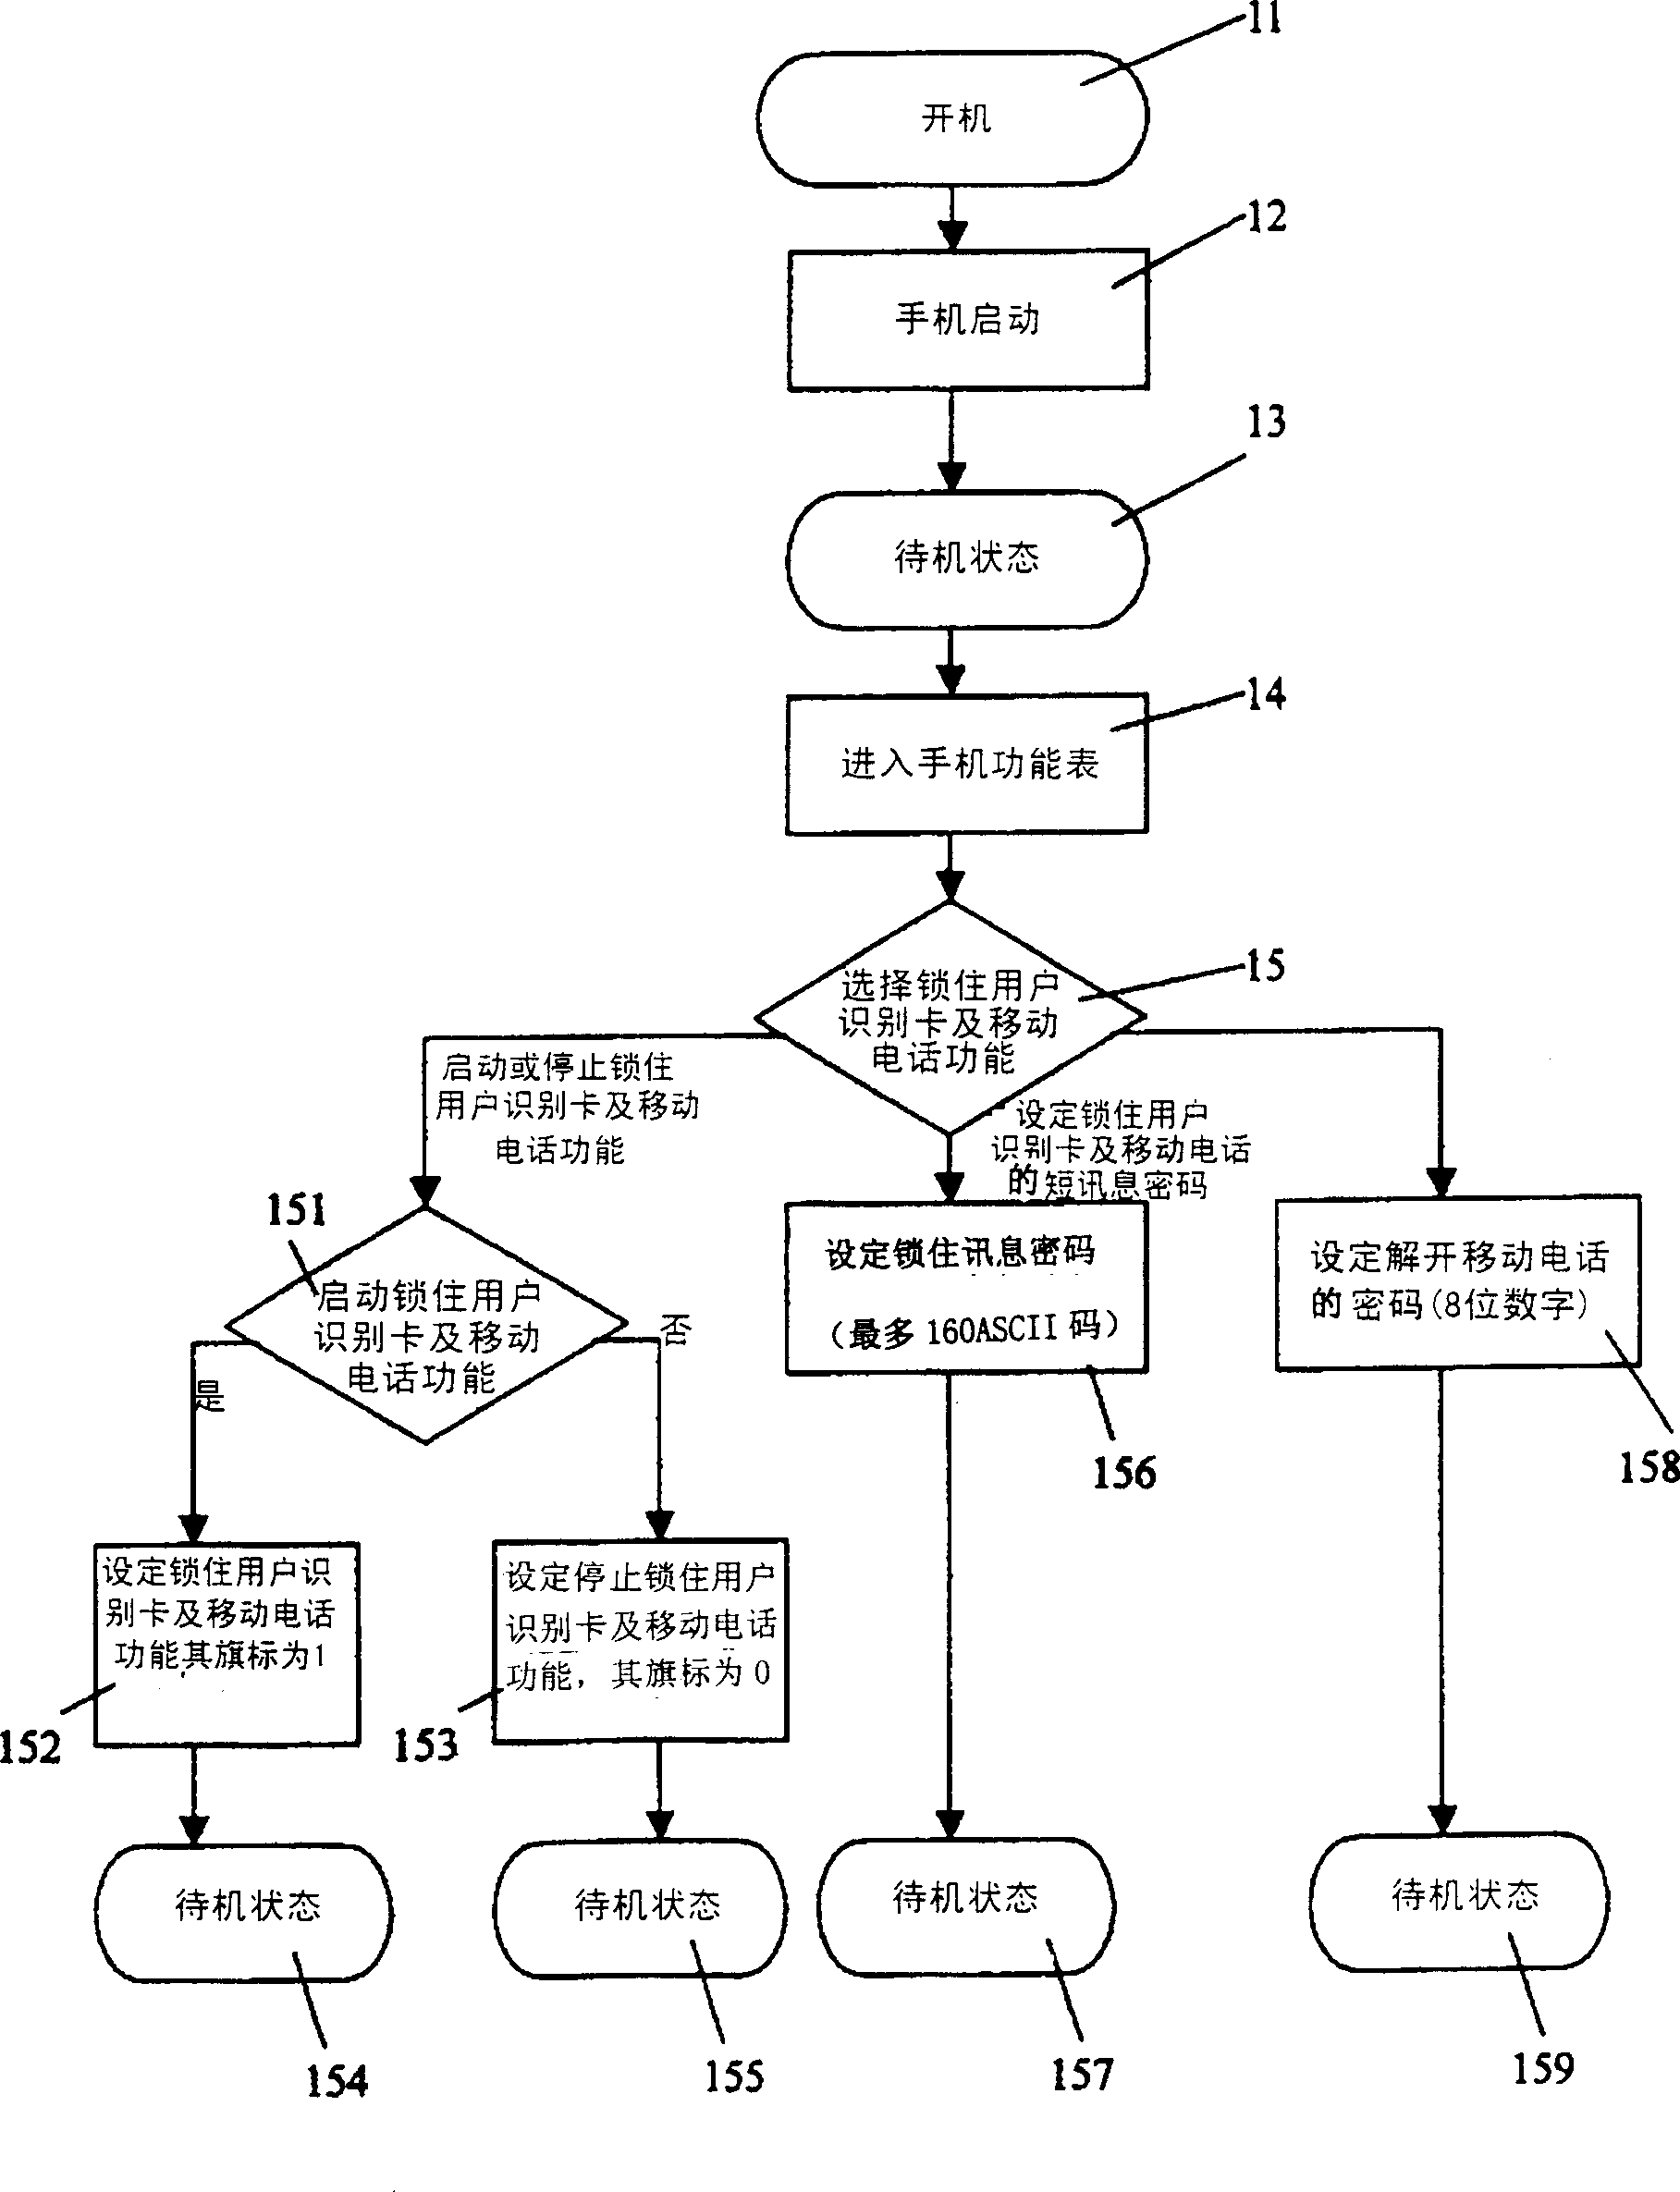 Method for locking user's identification card and mobile telephone by using short message